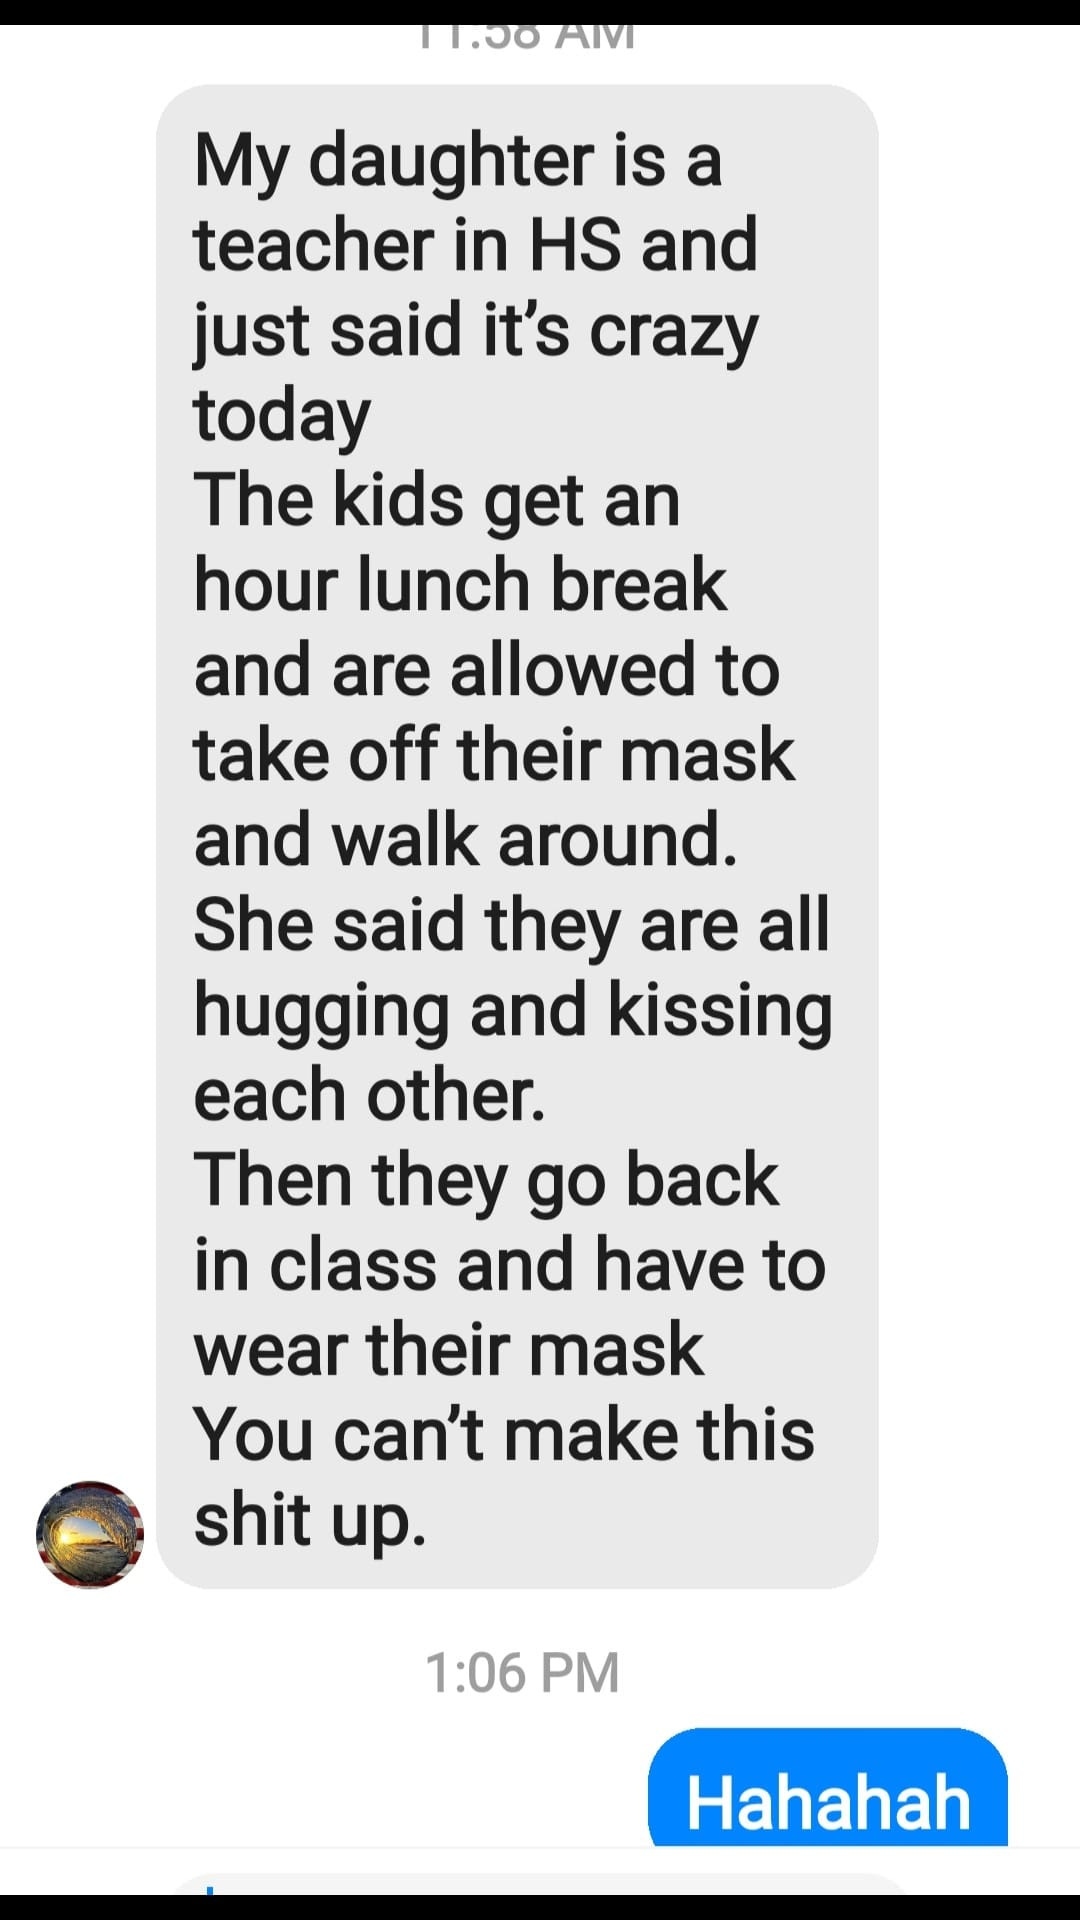 May be an image of text that says '11:00 11:00AM AM My daughter is a teacher in HS and and just said it's crazy today The kids get an hour lunch break and are allowed to take off their mask and walk around. She said they are all hugging and kissing each other. Then they go back in class and have to wear their mask You can't make this shit up. 1:06 PM Hahahah'